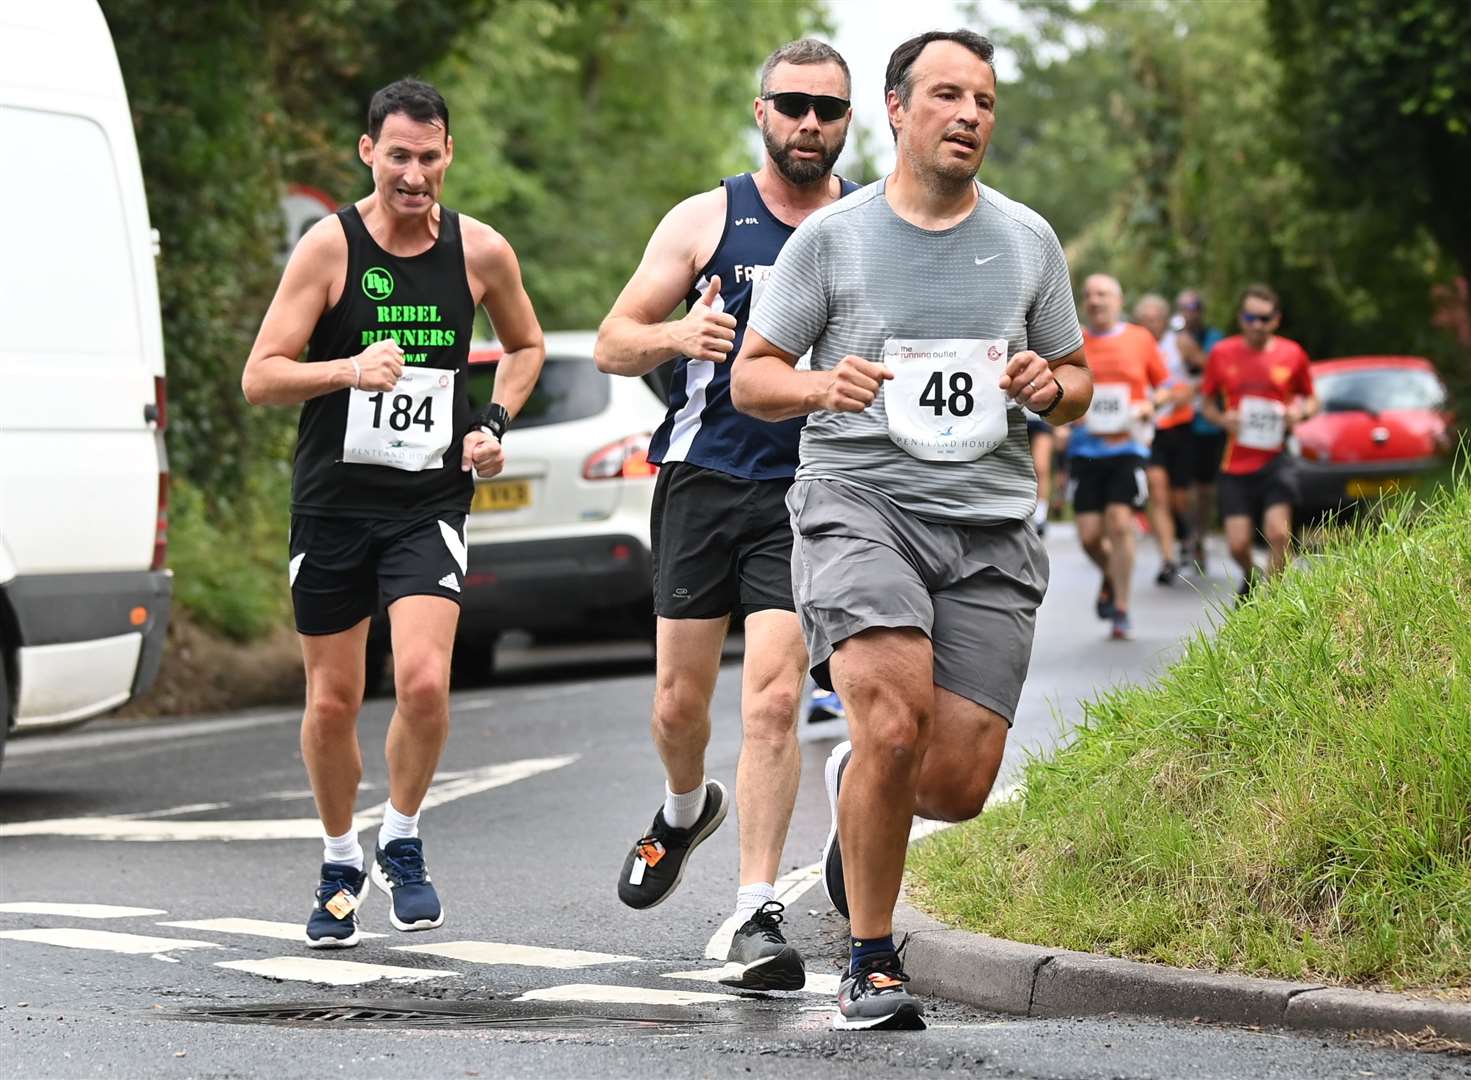 Nick Bryant (48) of Christ Church Runners and Michael Harvey (184) of Rebel Runners Medway. Picture: Barry Goodwin (49790399)